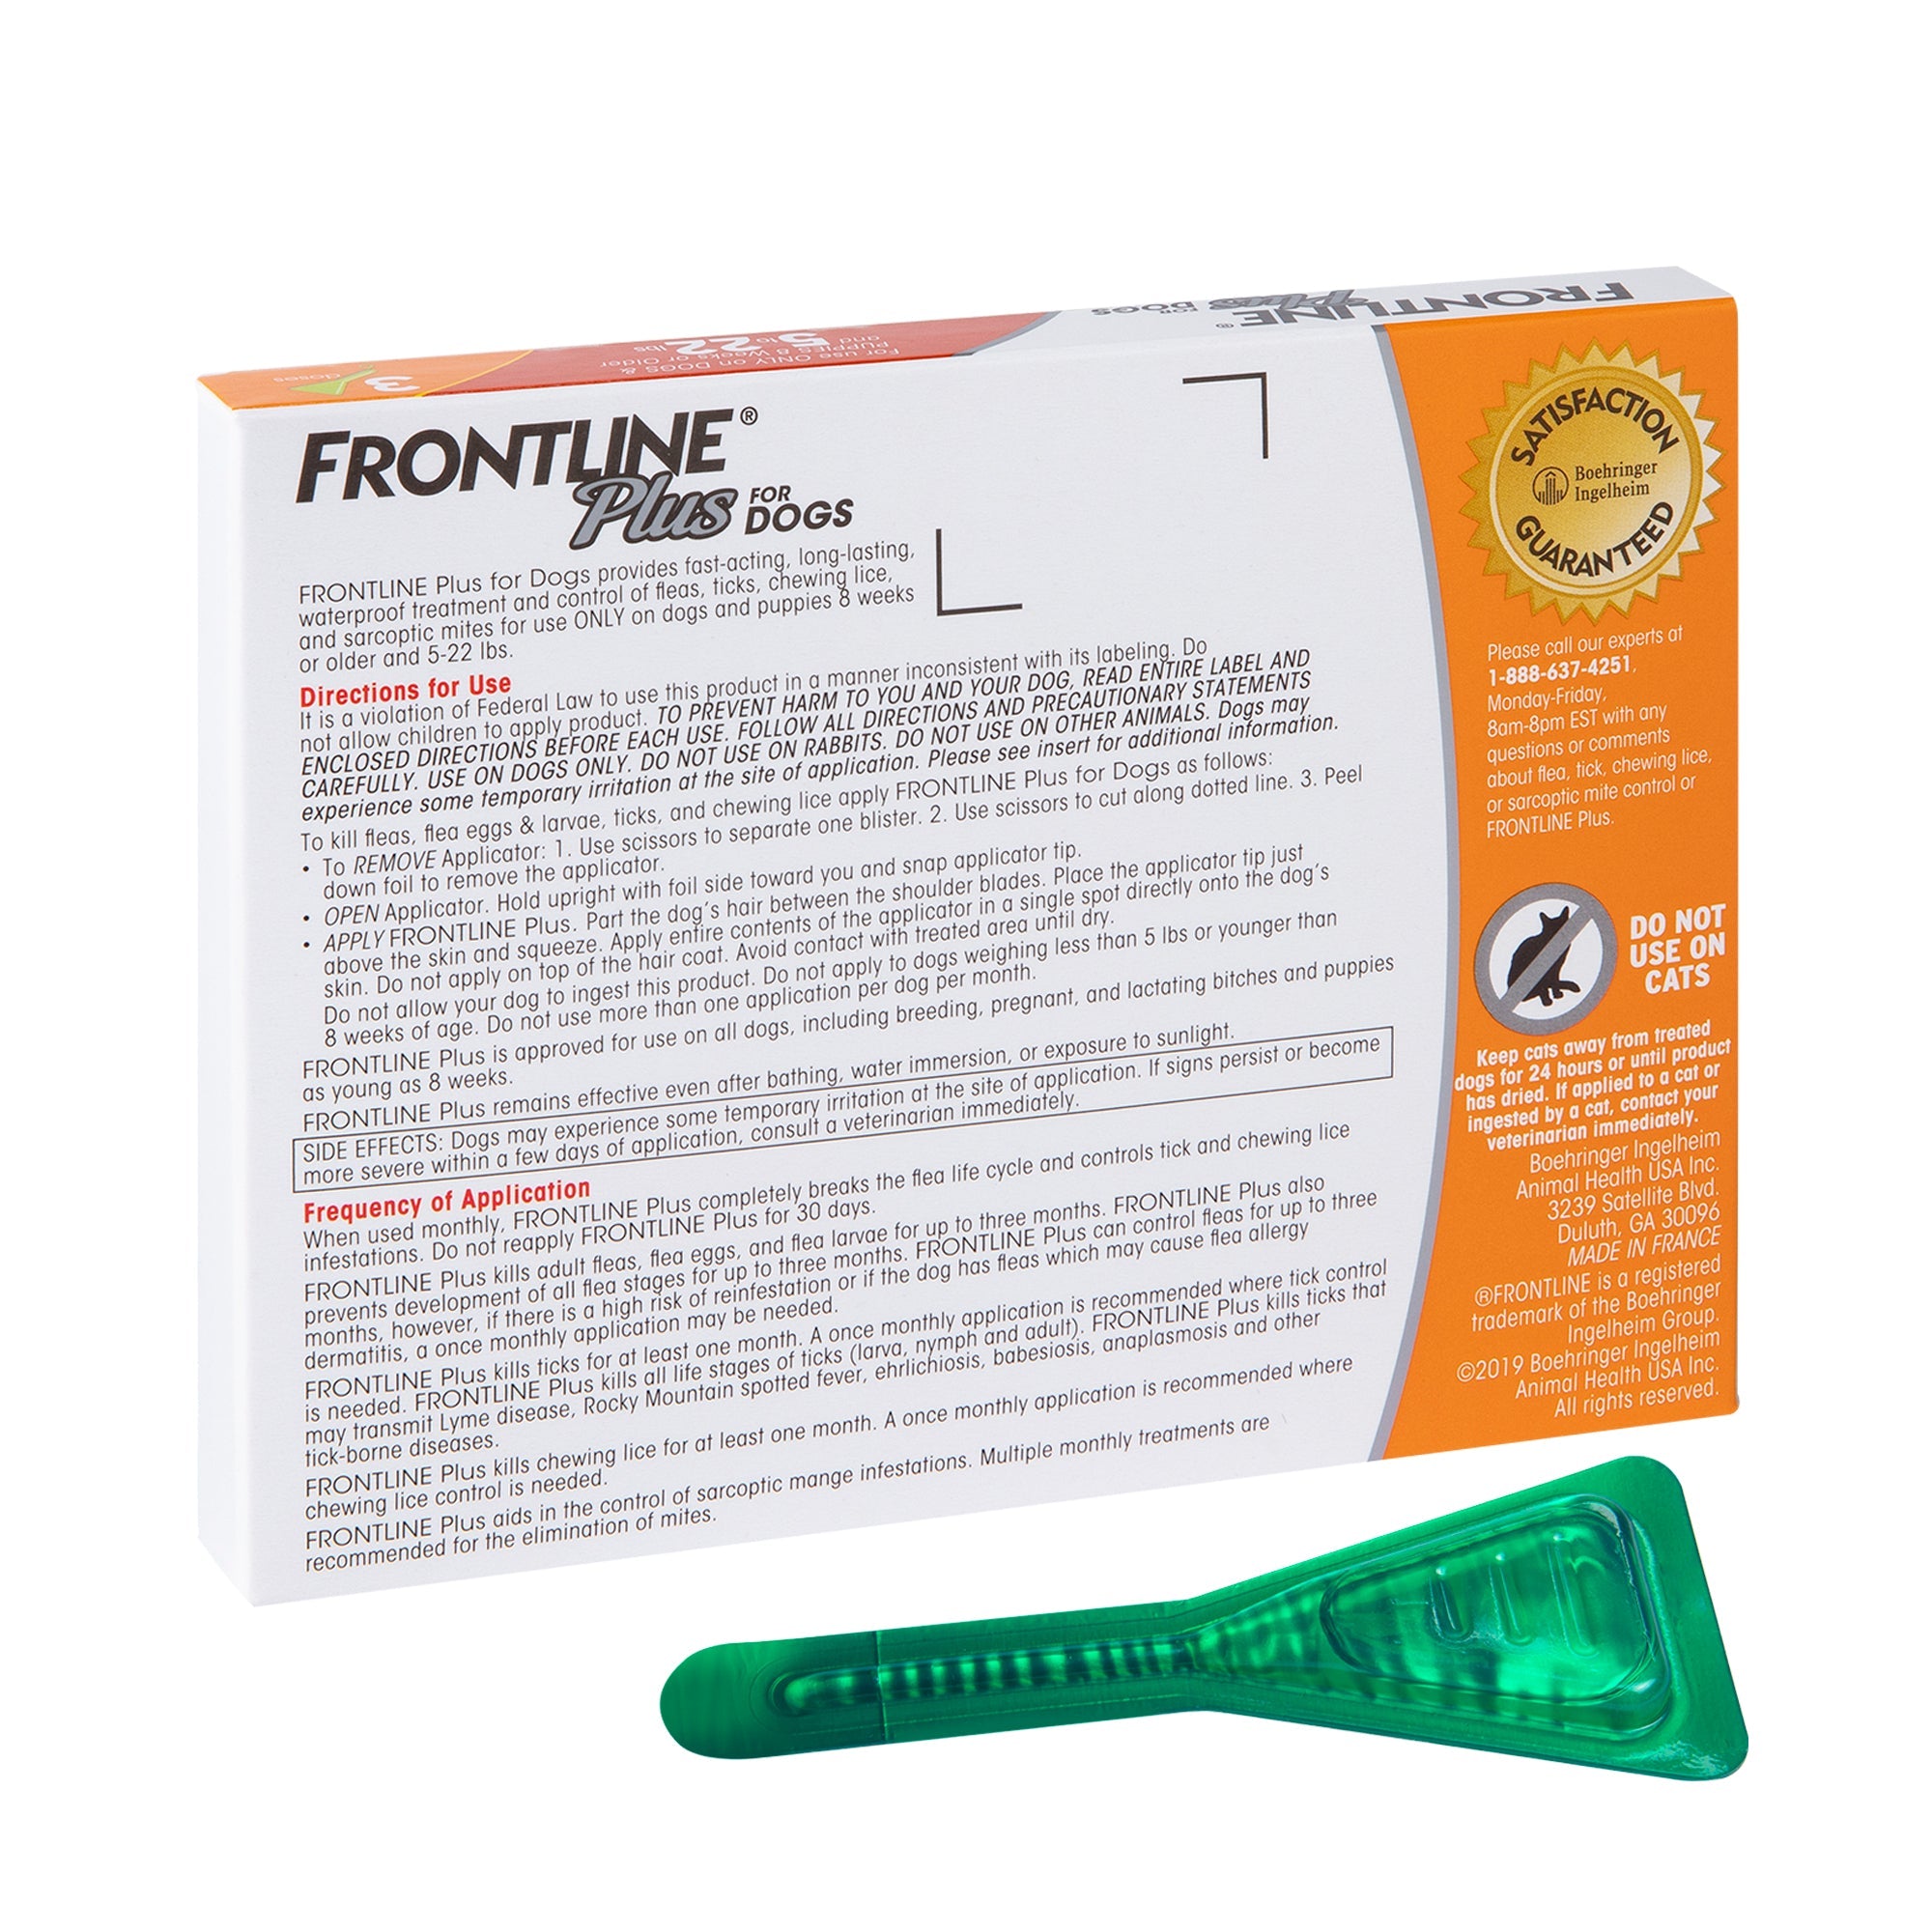 FRONTLINE Plus Flea and Tick Treatment for Small Dogs 5-22 Lbs, 6 Doses